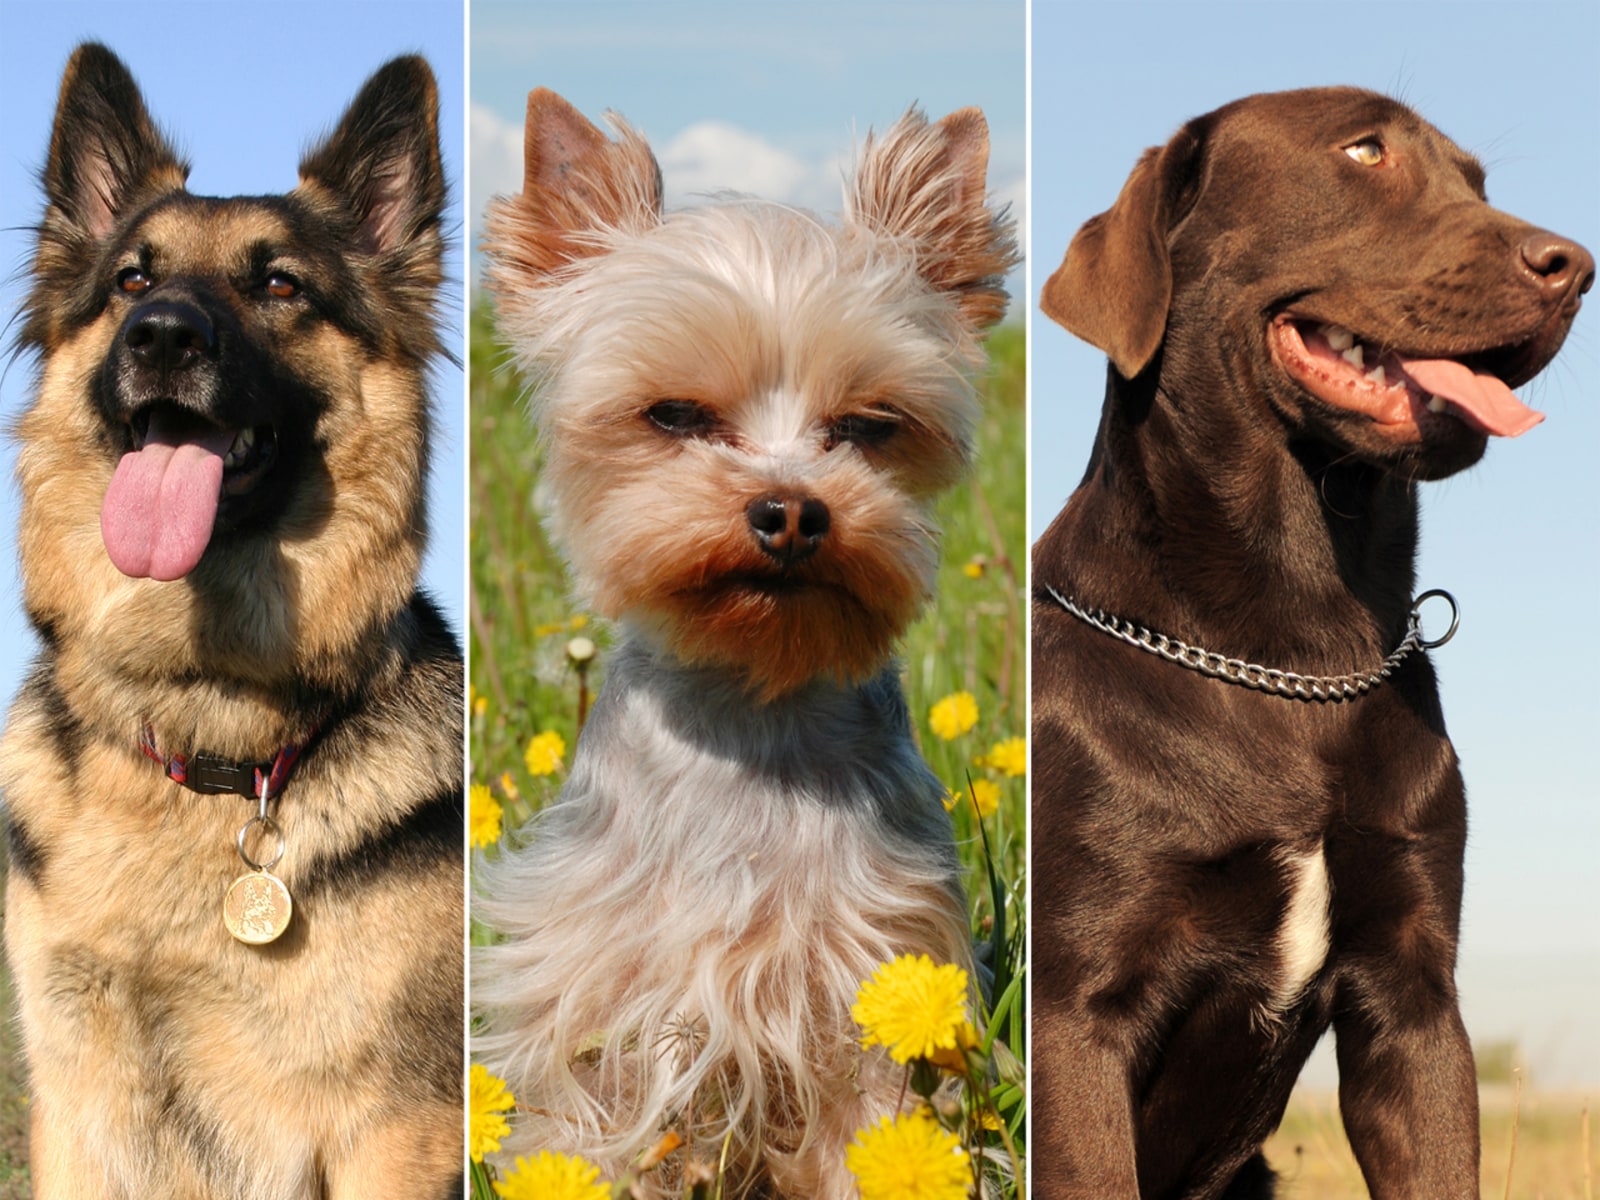 Which breed is America's top dog of 2012?